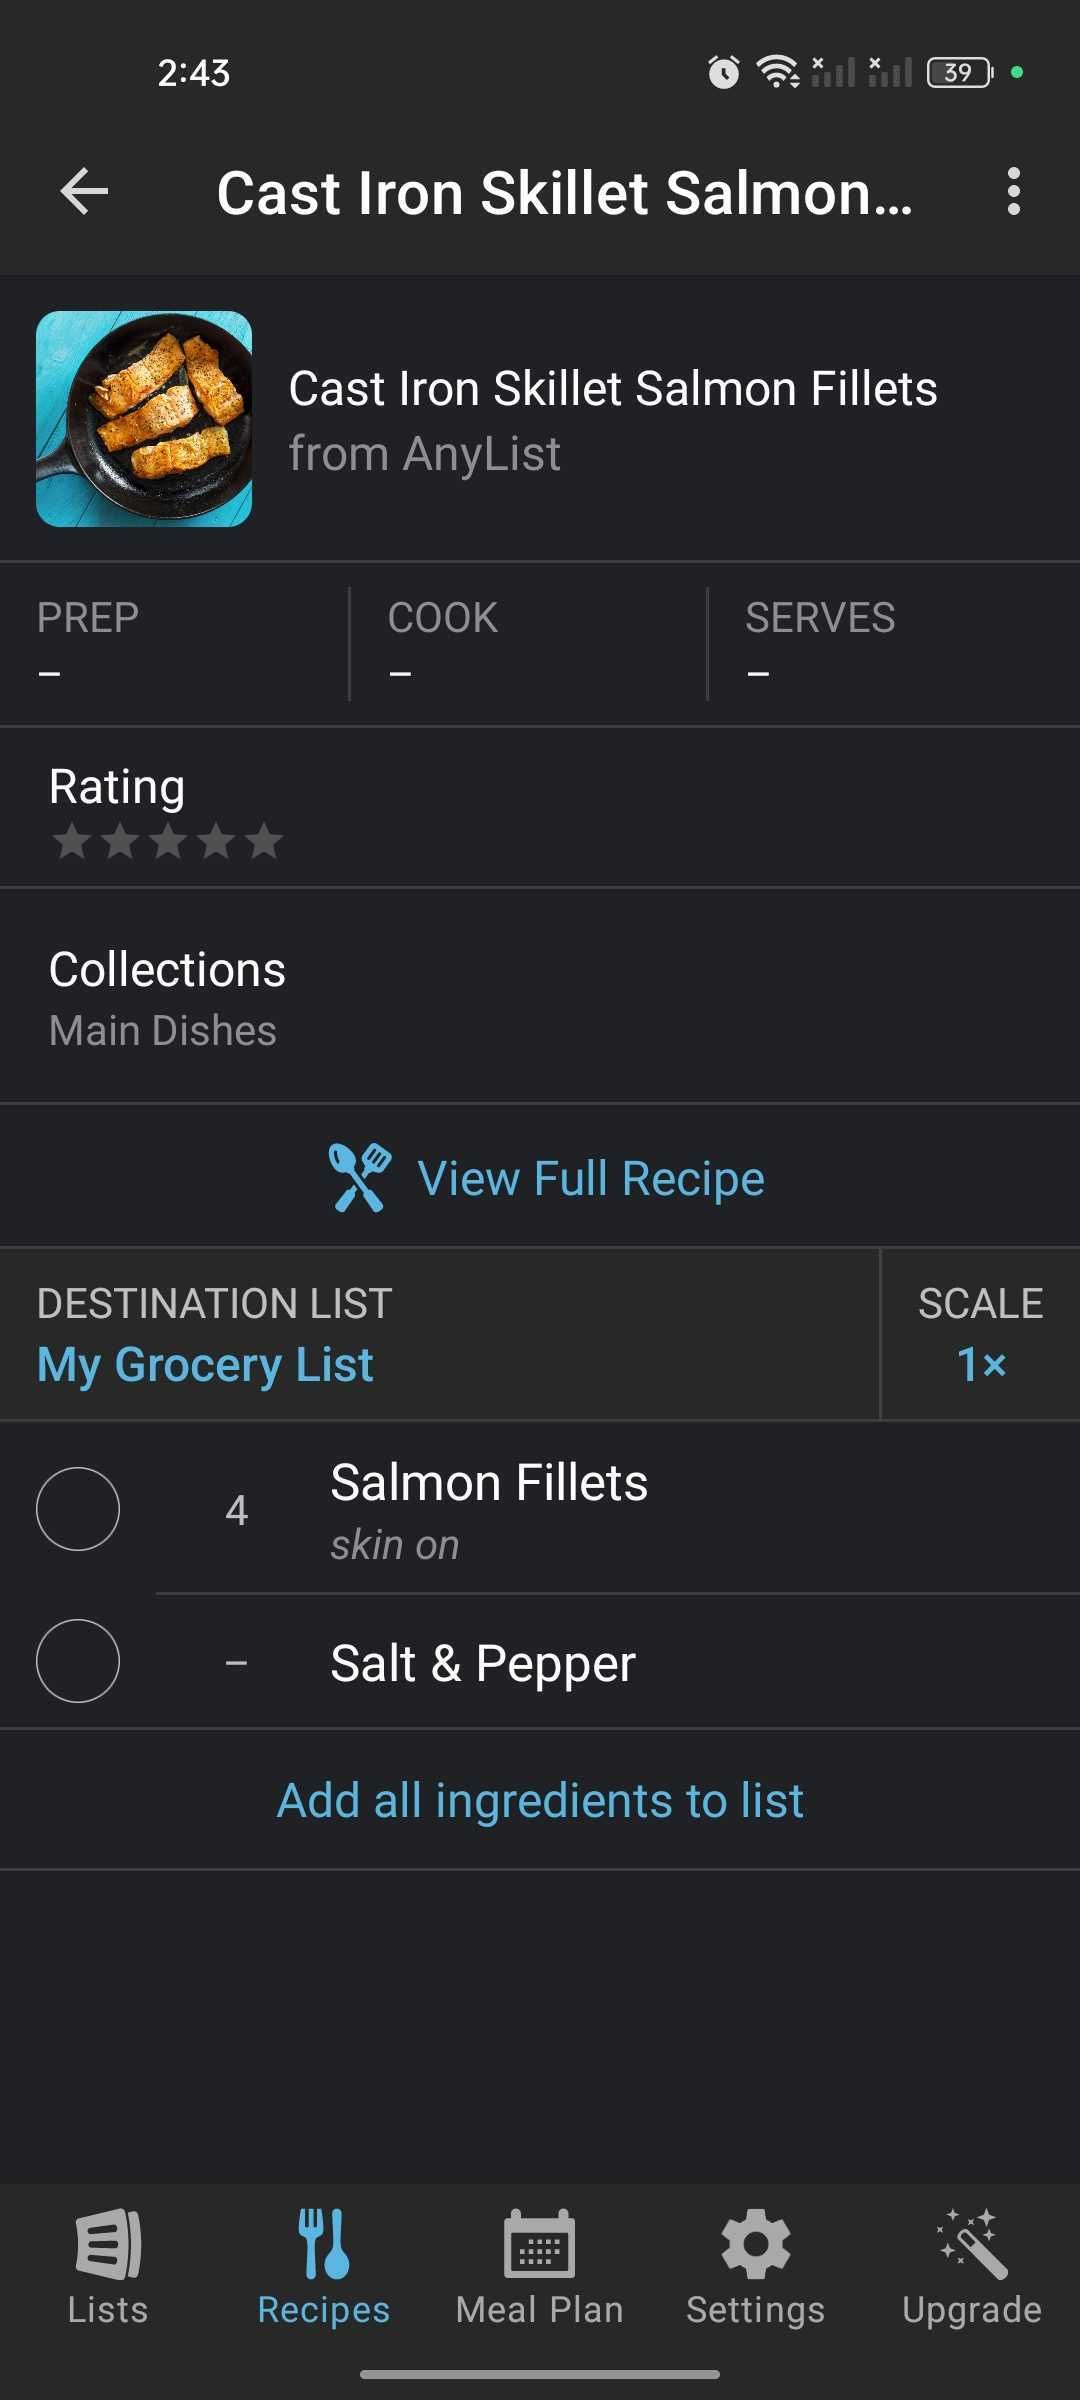 Salmon fillet recipe in the AnyList app